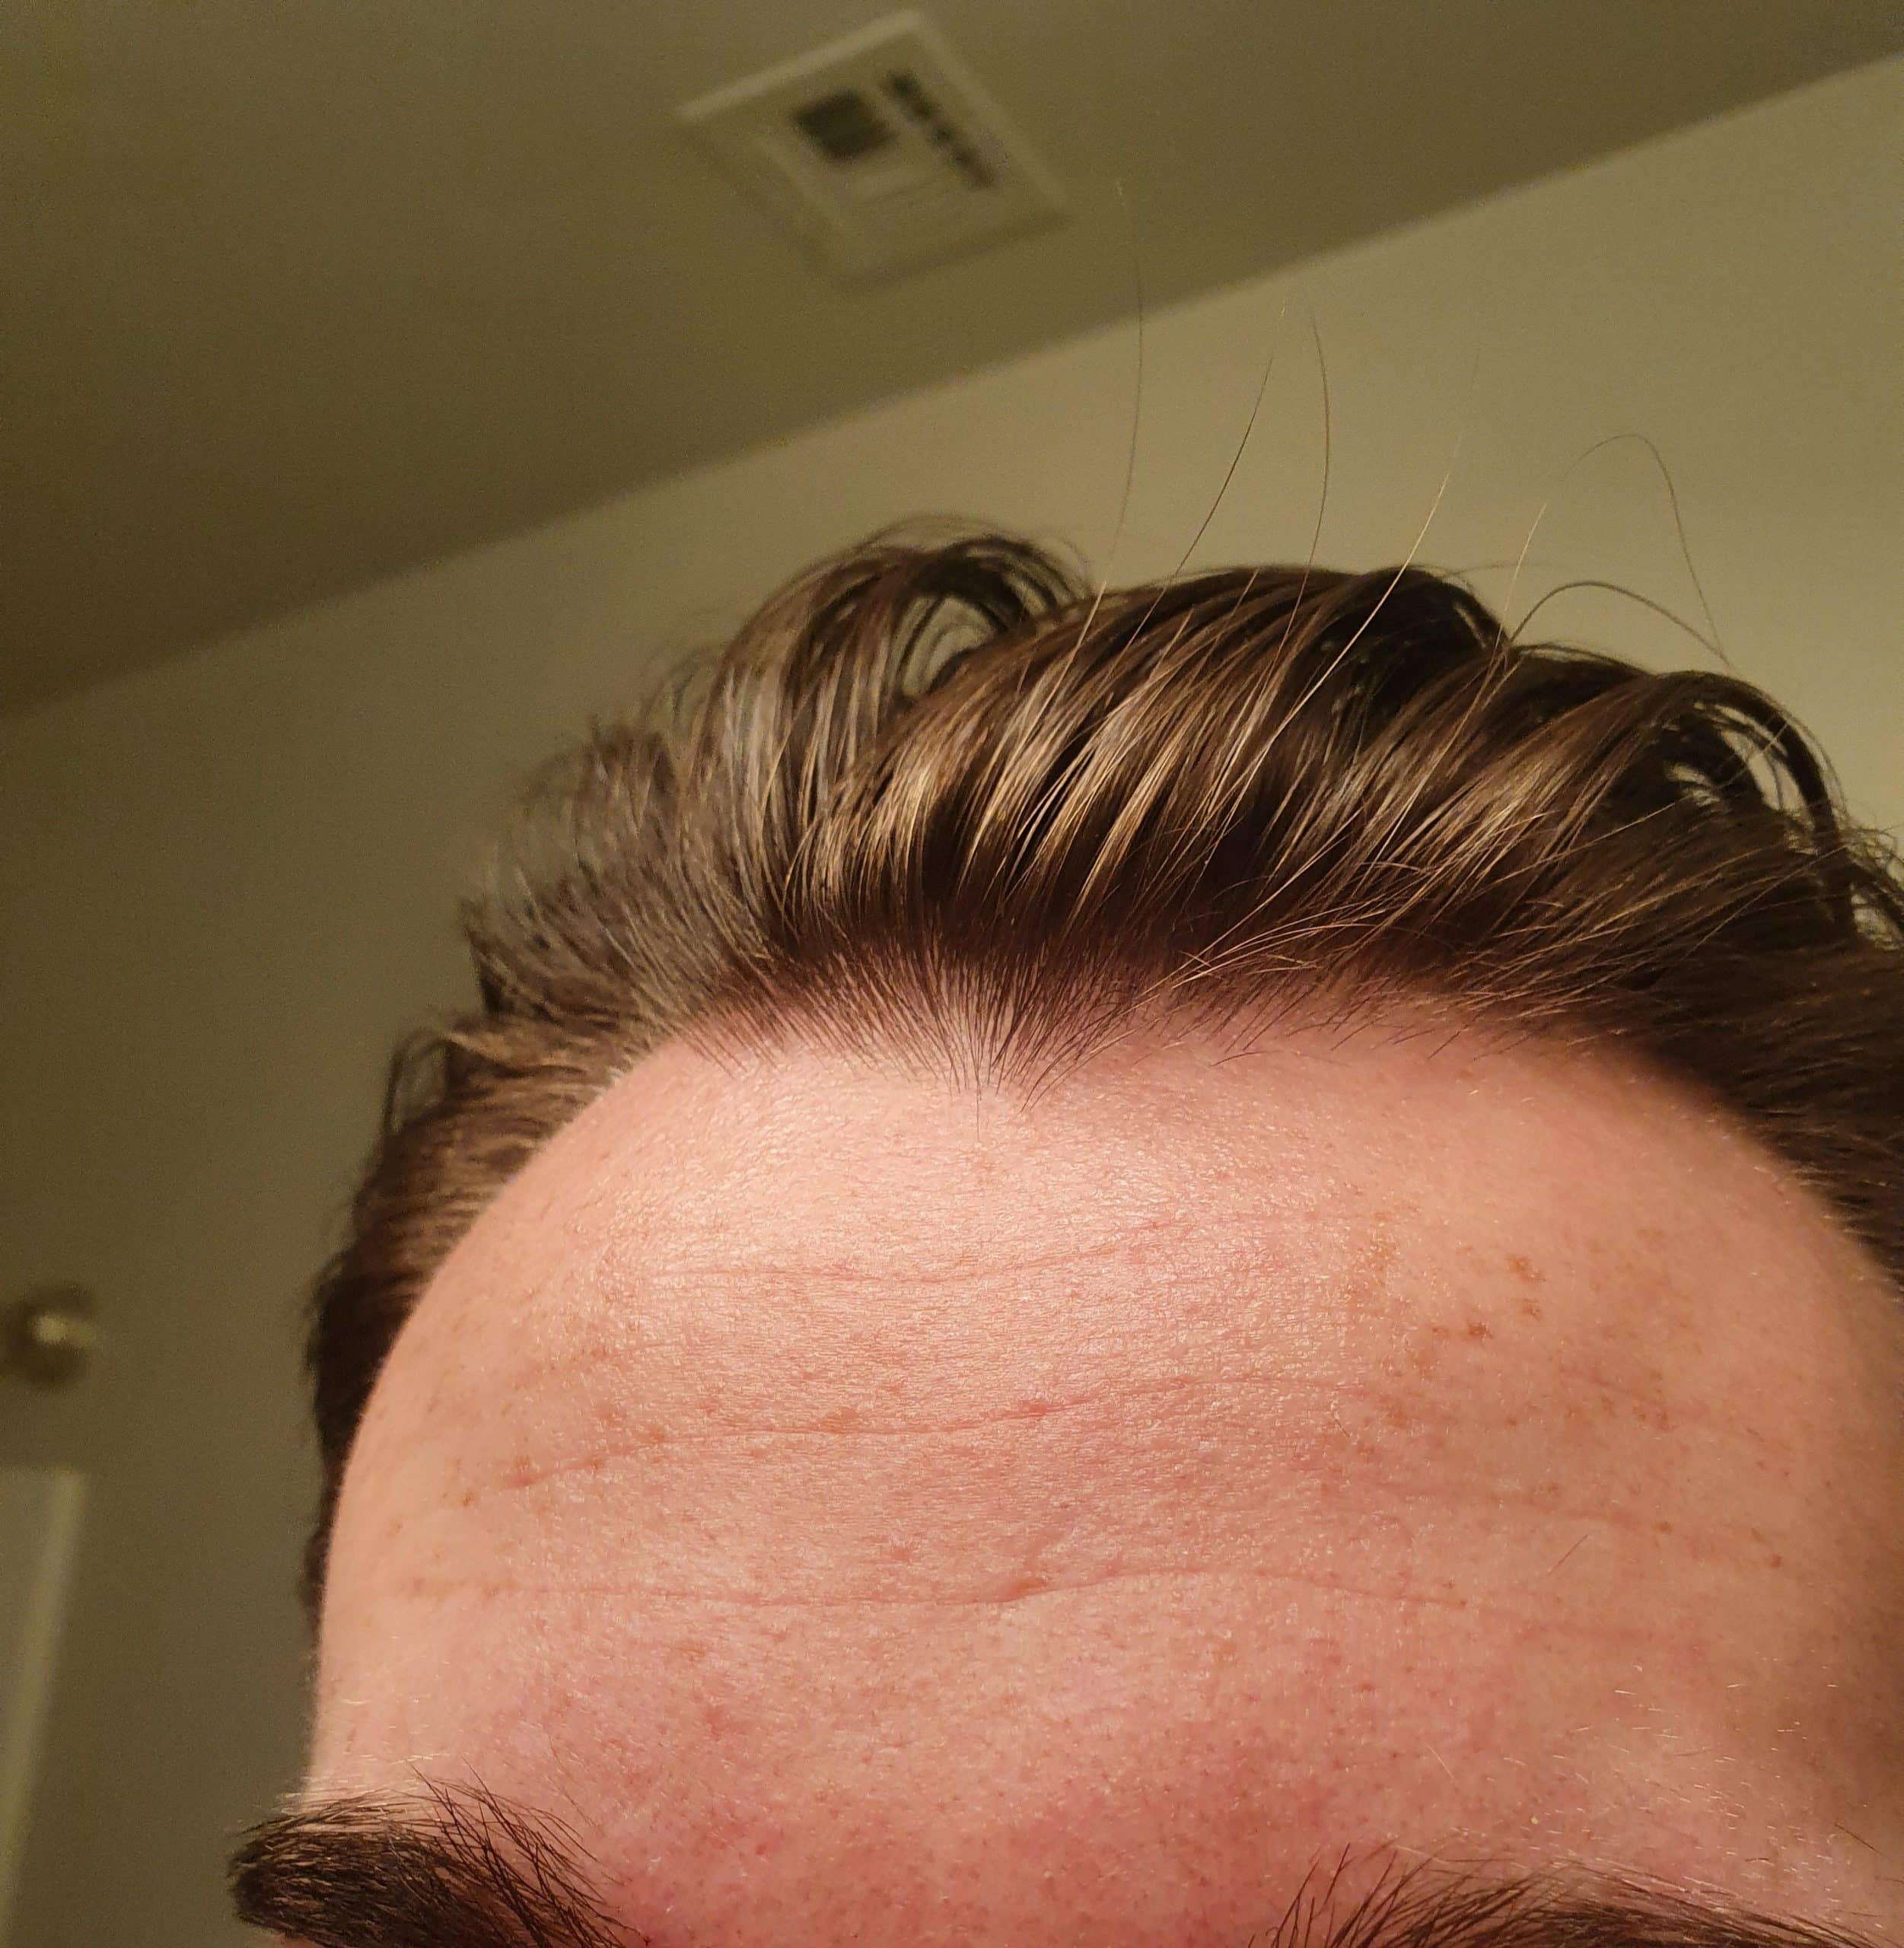 Help with getting rid of textured and bumpy skin? Anything that can ...